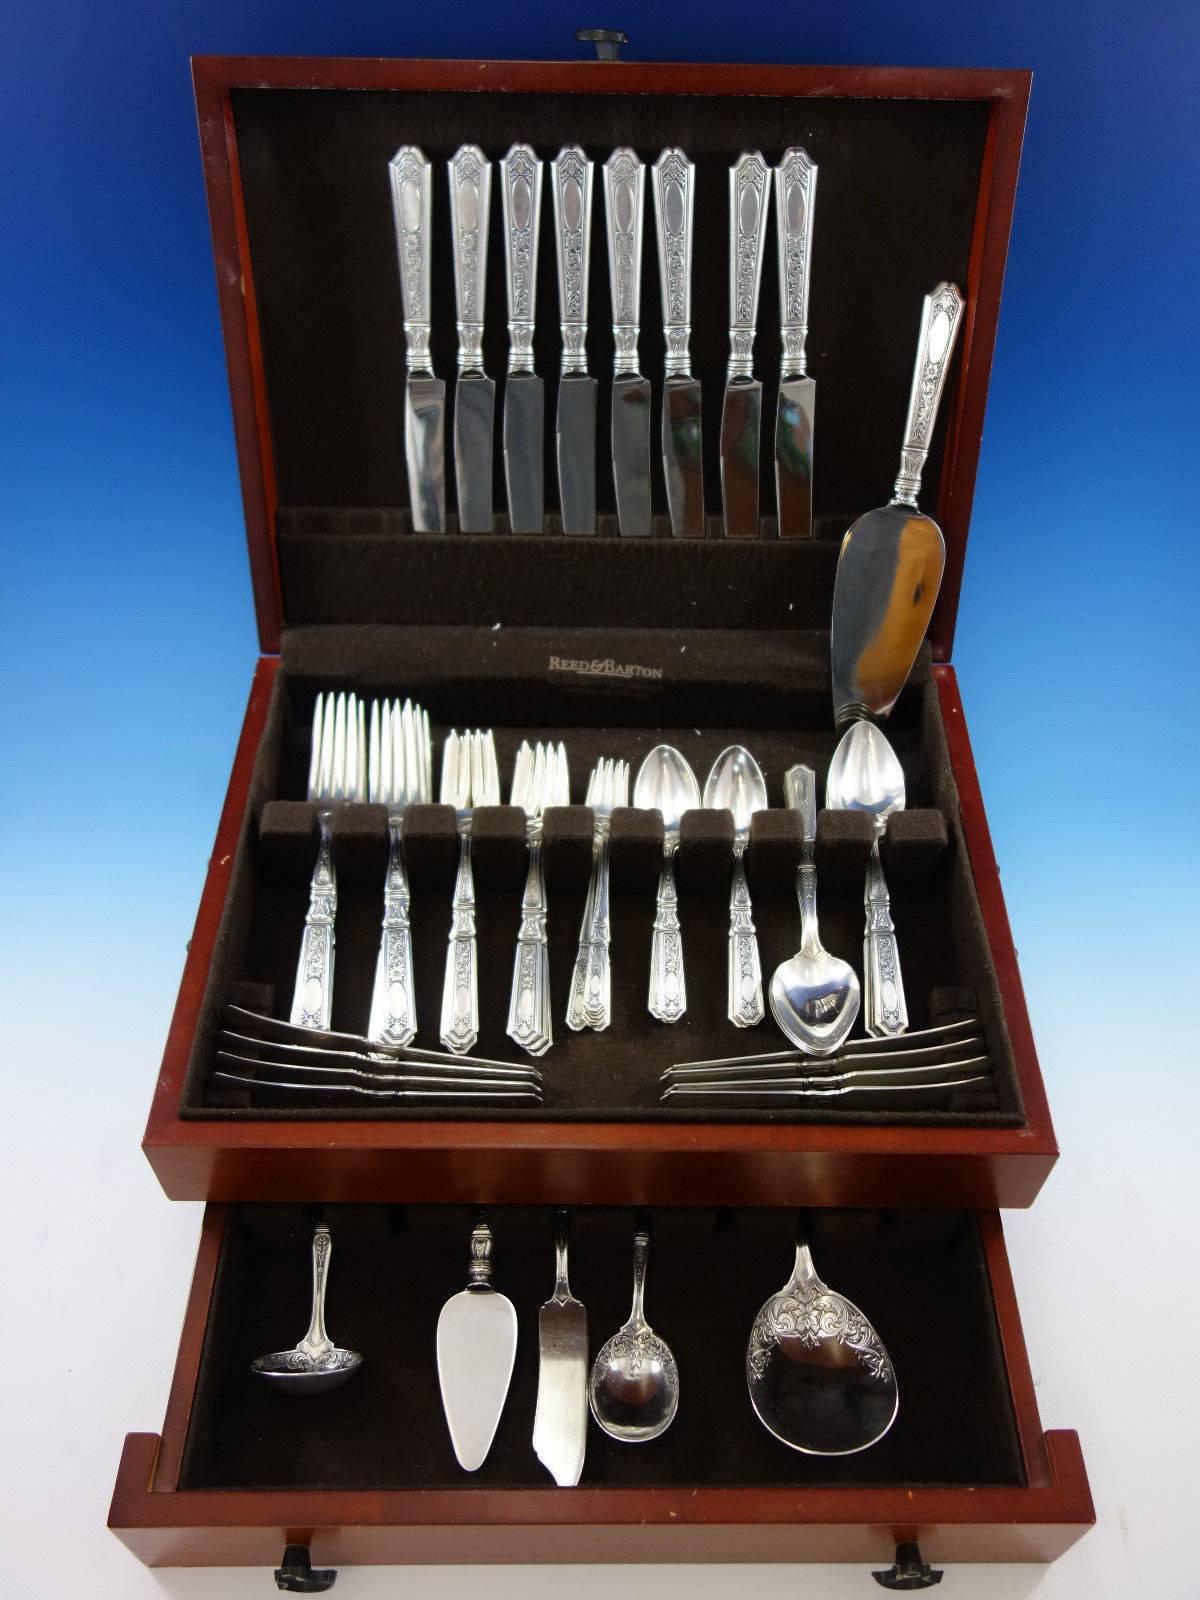 Dinner size Saint Dunstan Chased by Gorham sterling silver flatware set - 62 pieces. This set includes: 

Eight dinner size knives, 9 3/4